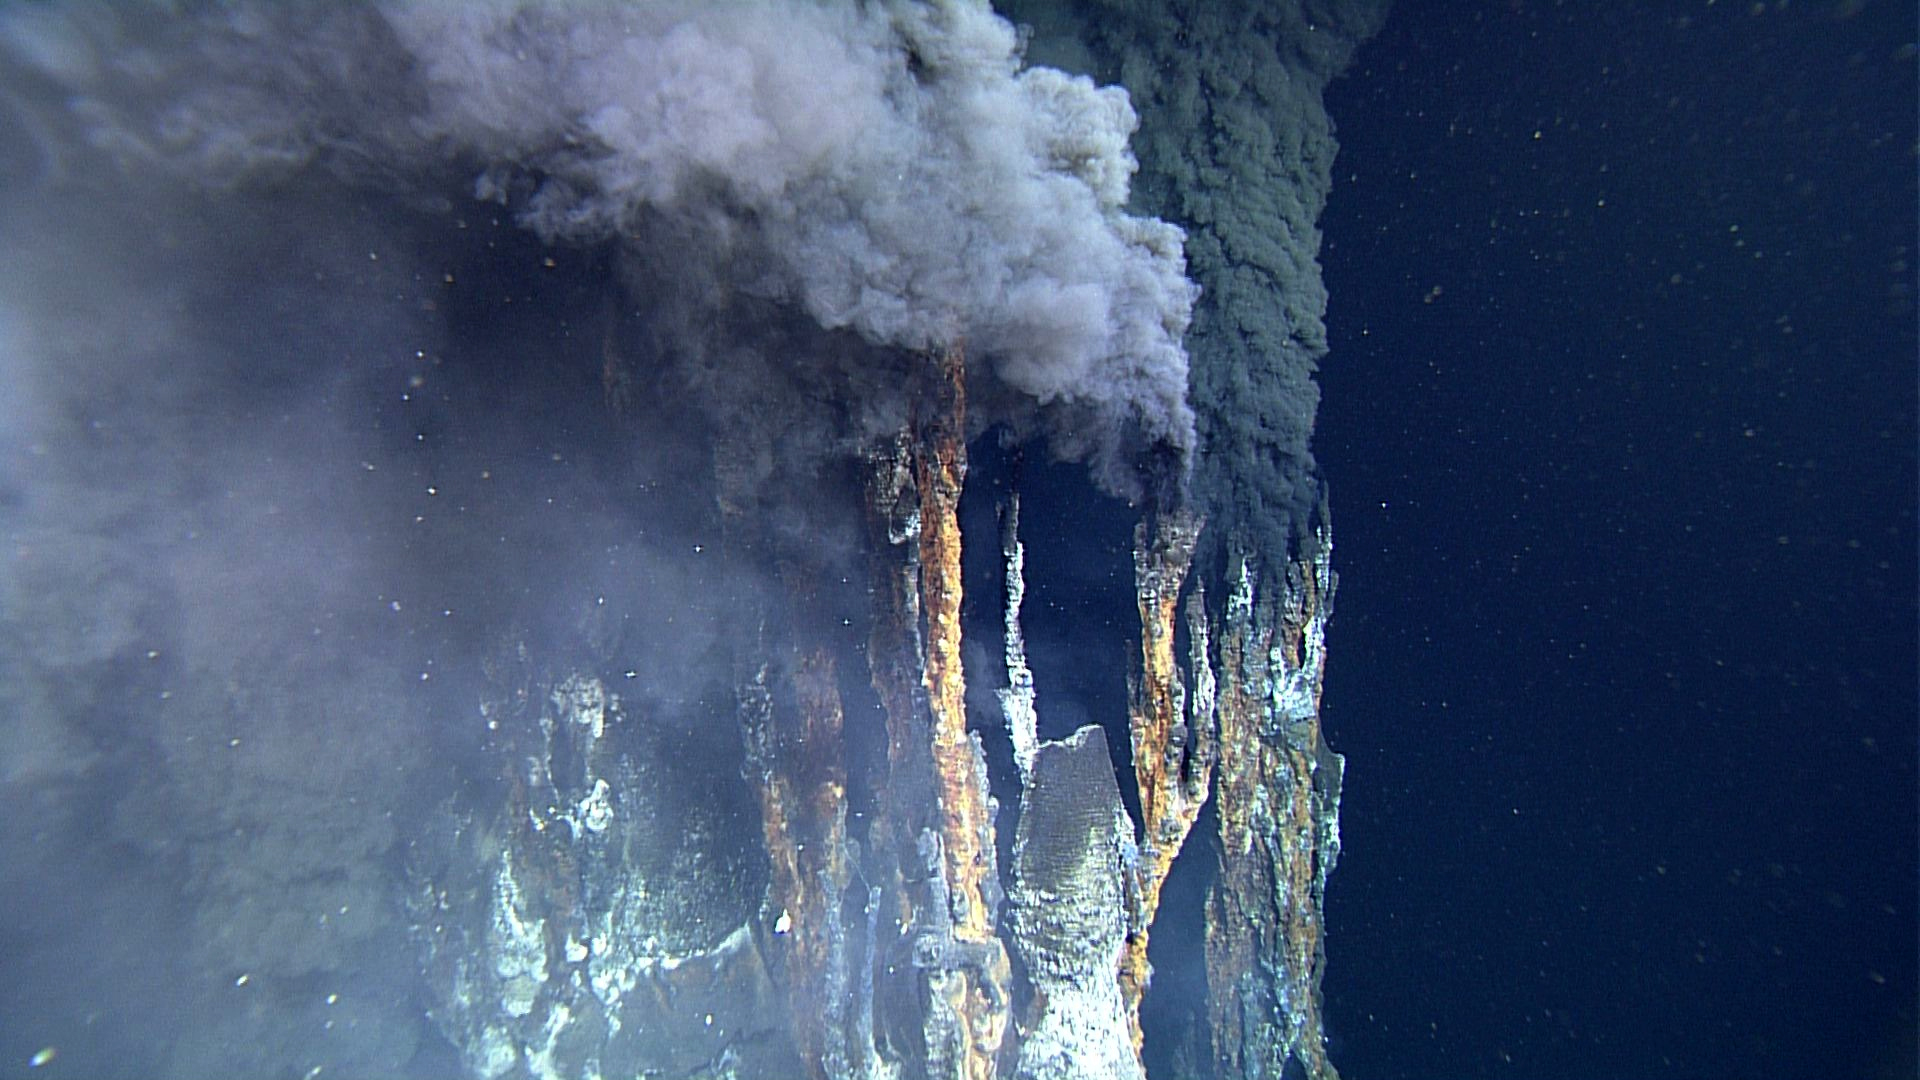 This thermal vent or "black smoker" is located in the Gulf of California and spews mineral-rich water that's over 550 degrees Fahrenheit.